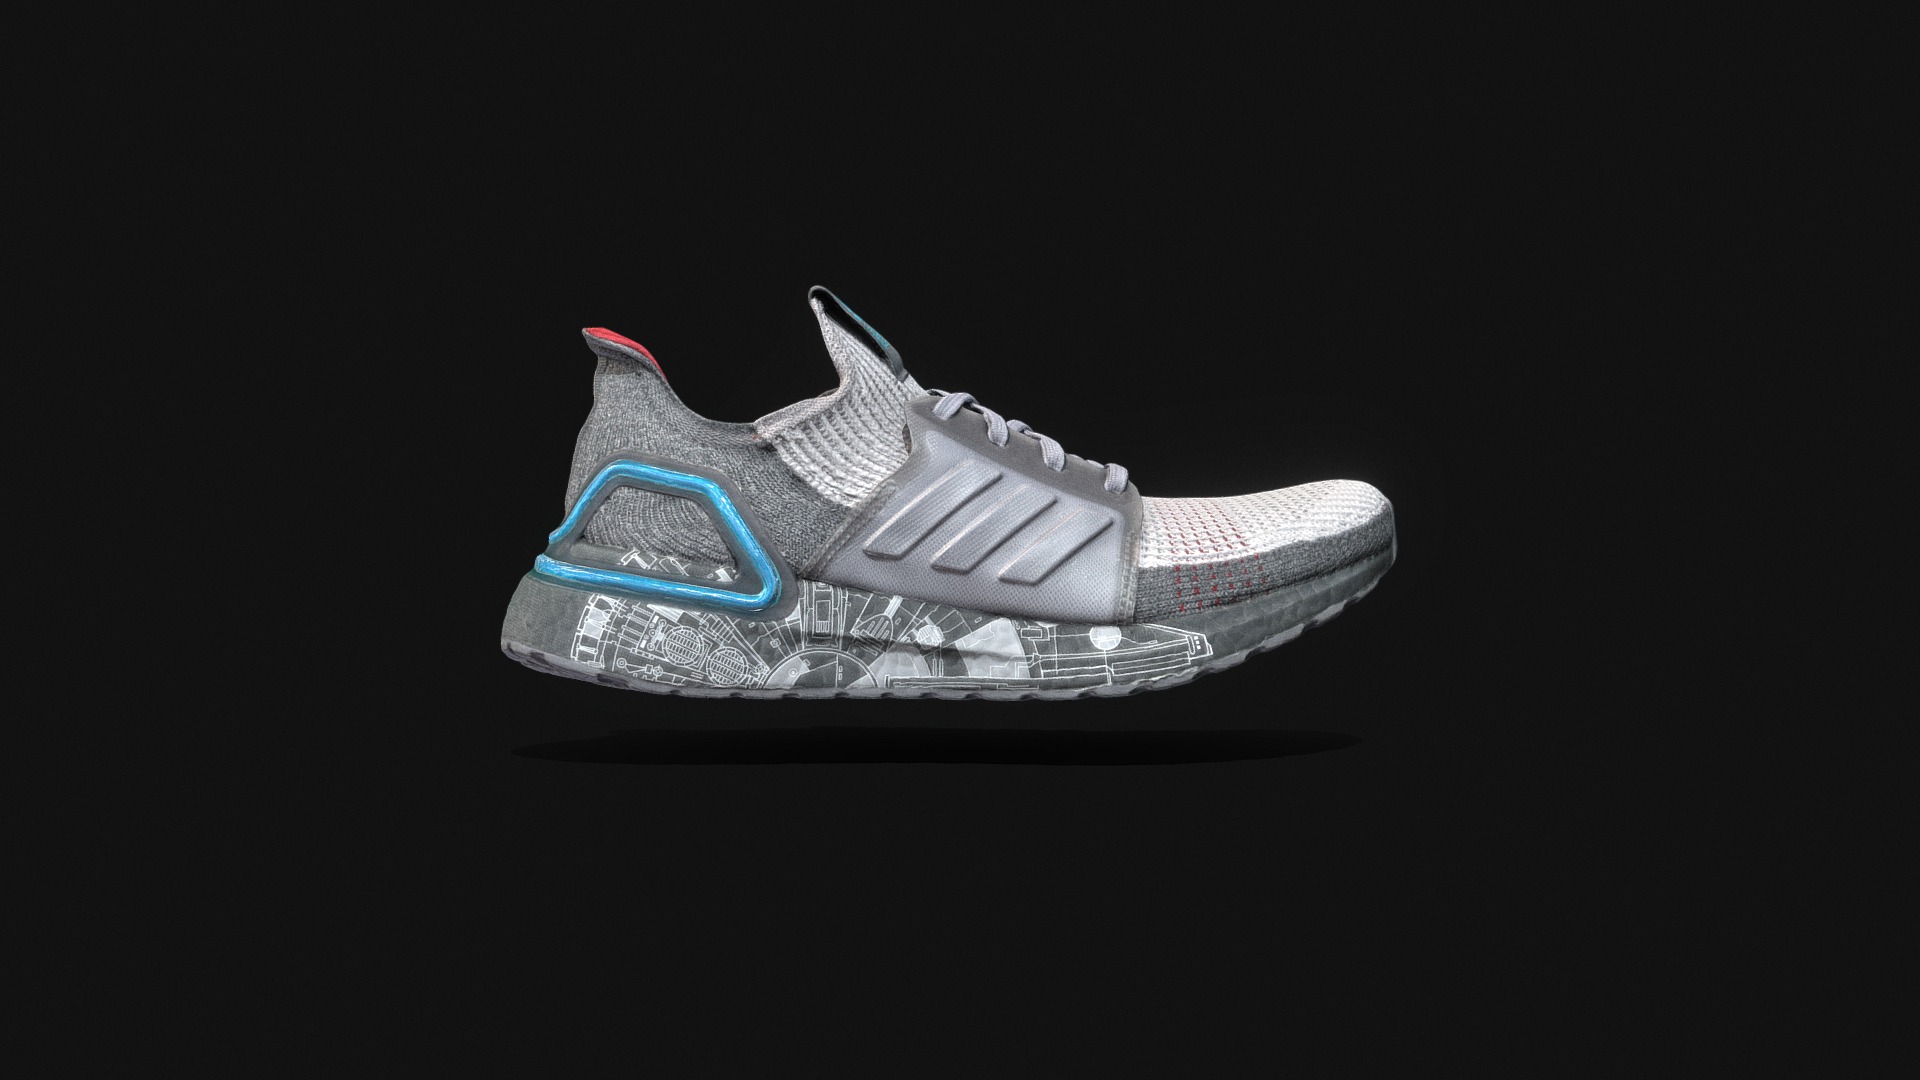 3D model Adidas Ultraboost 2019 - This is a 3D model of the Adidas Ultraboost 2019. The 3D model is about a white and blue shoe.